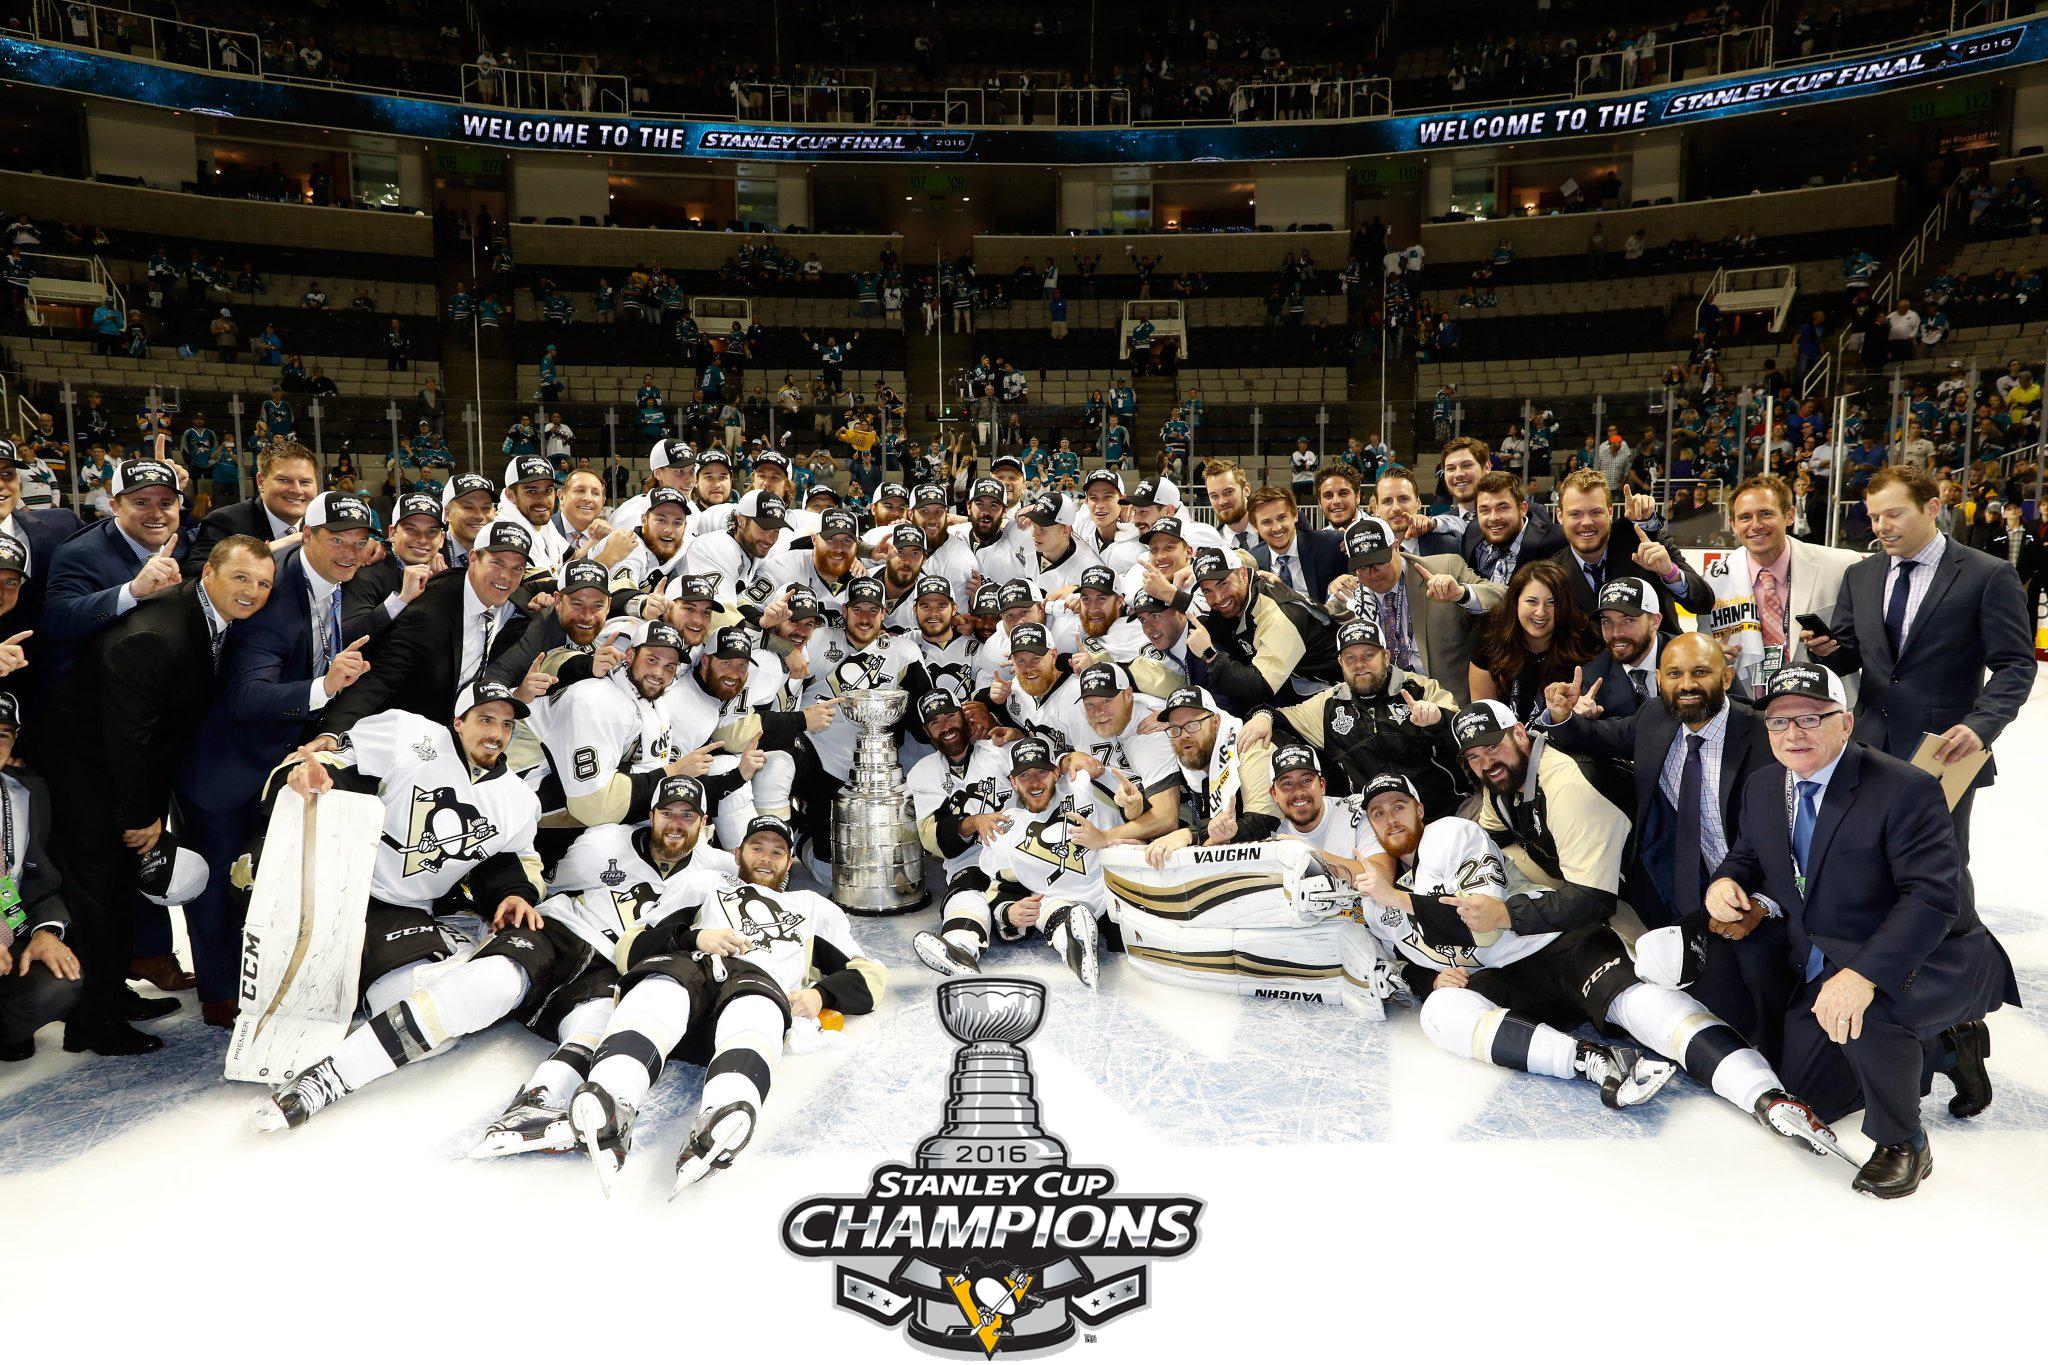 Phil Kessel Pittsburgh Penguins Unsigned 2016 Stanley Cup Champions Raising  Cup Photograph